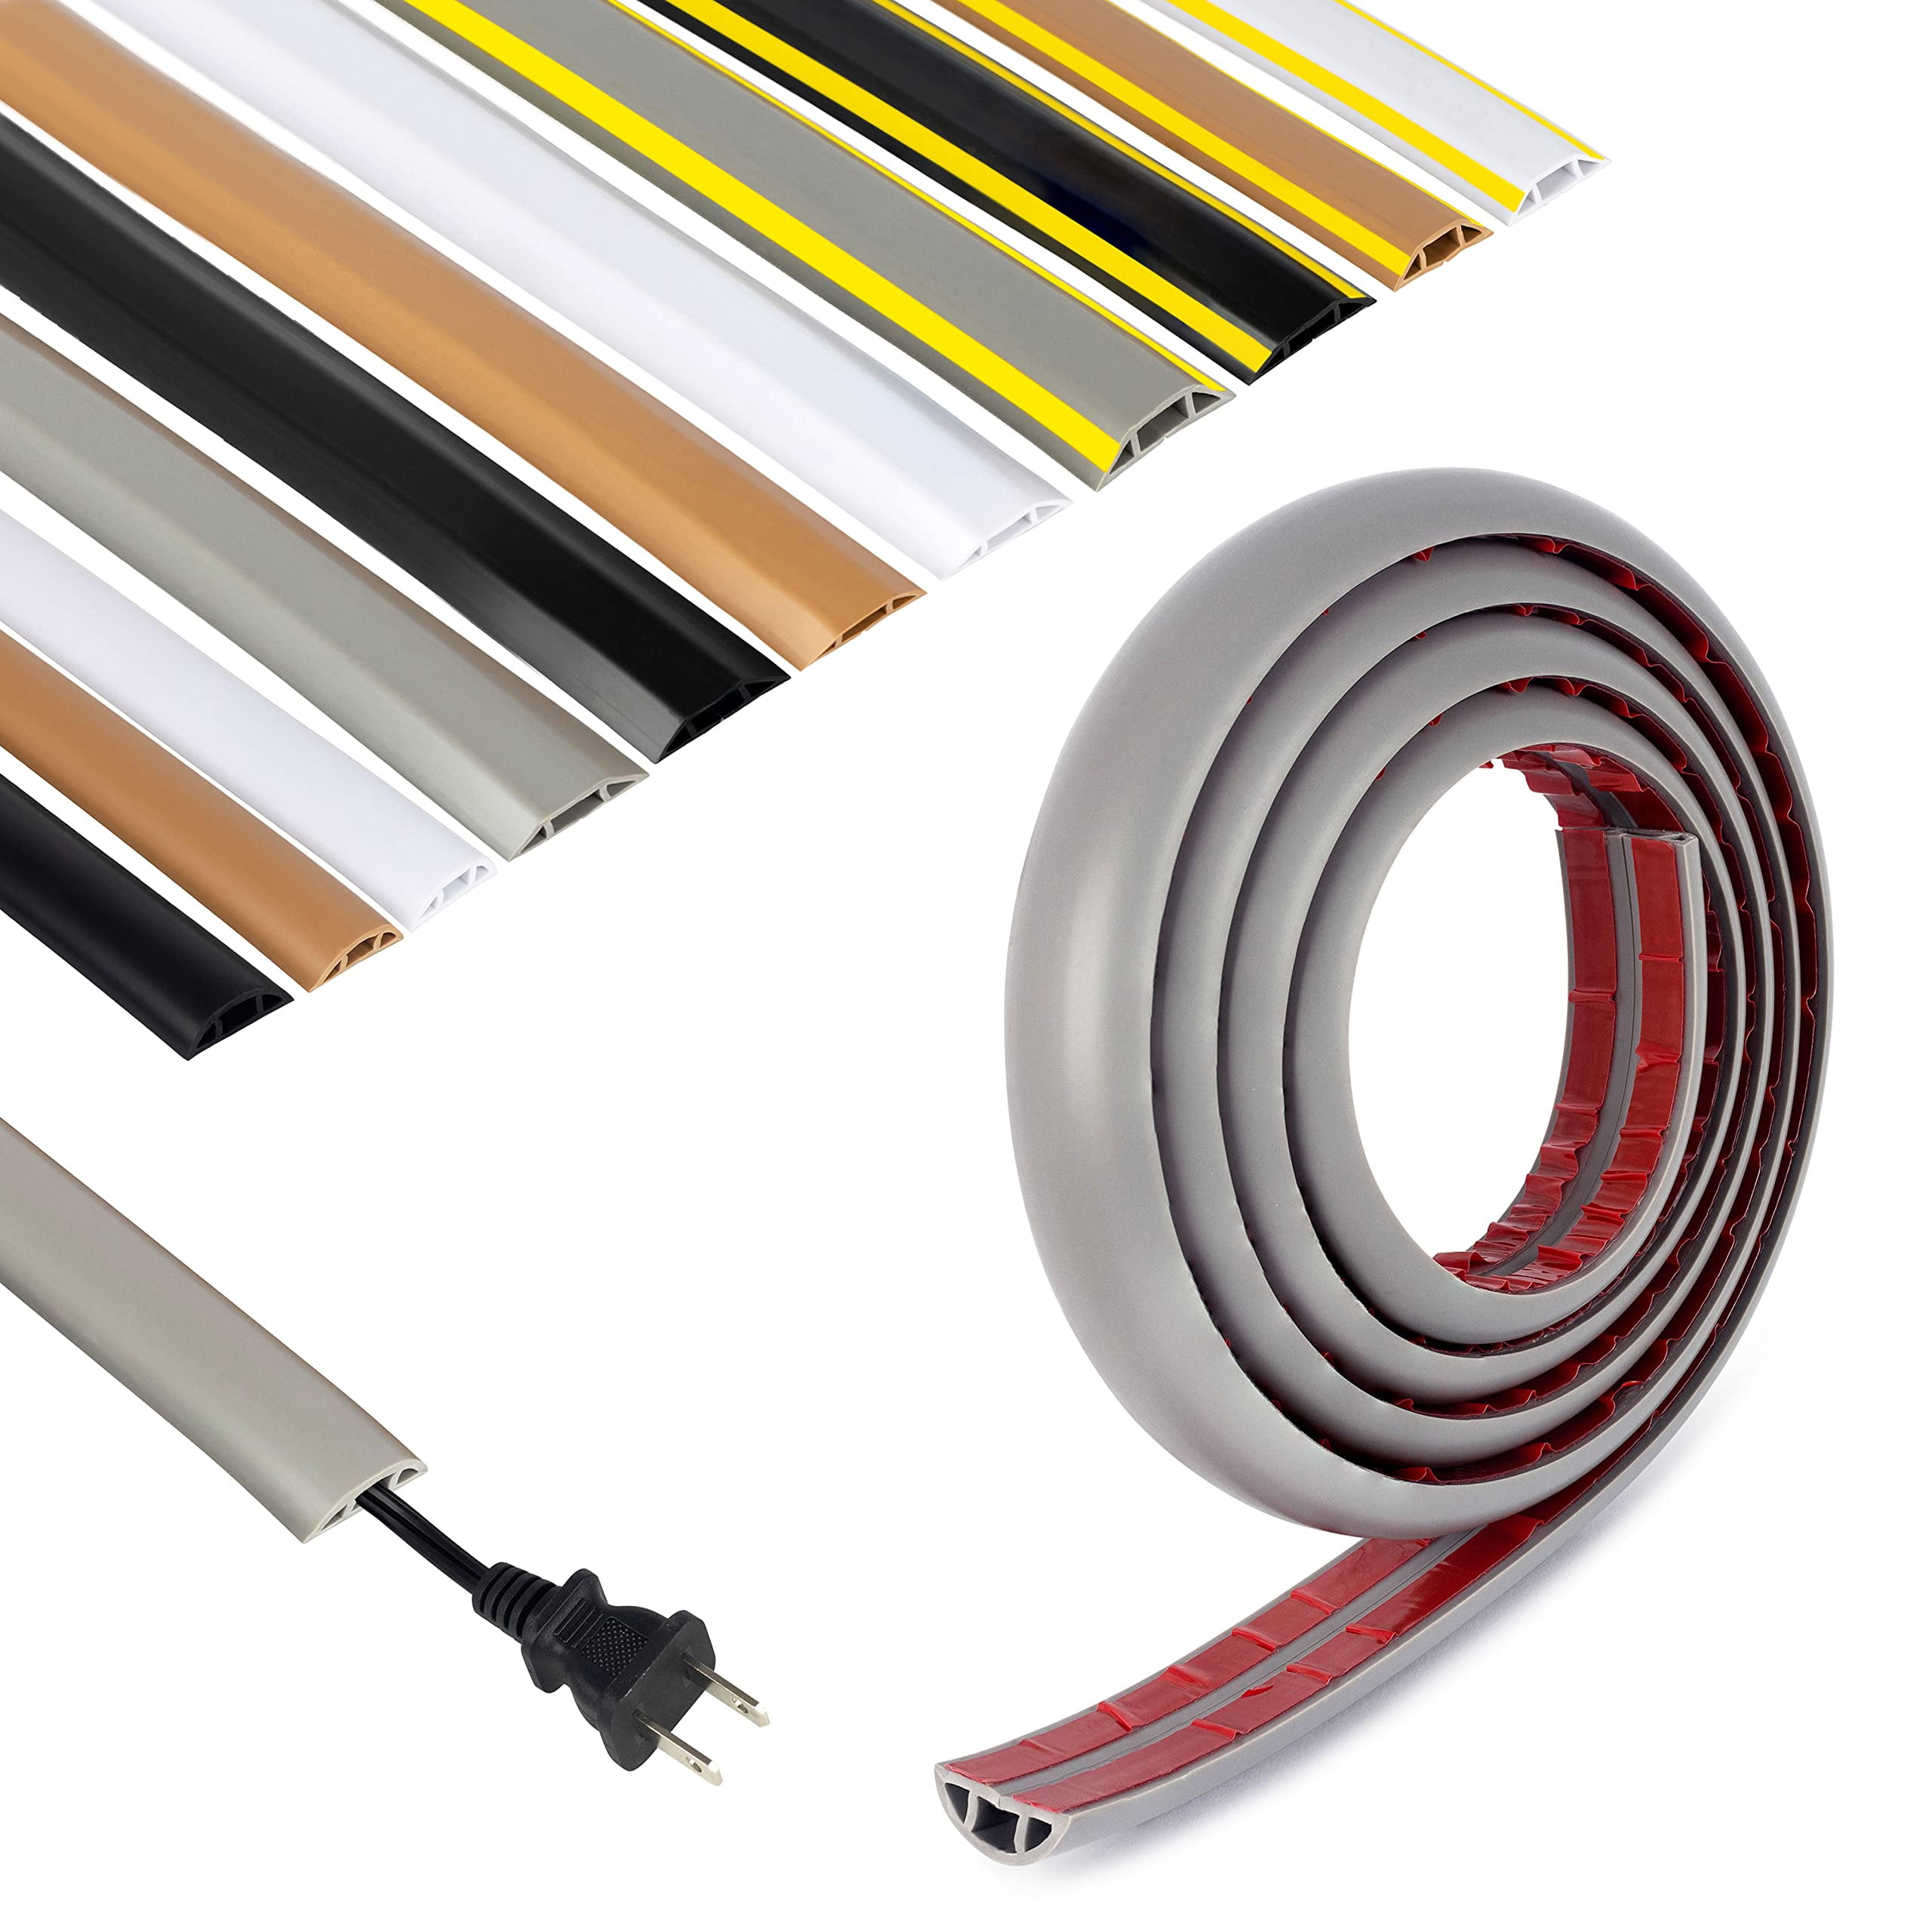 6.5ft Floor Cord Cover Cable Protector, Strong Self-Adhesive Rubber Wire  Management Organizer Hider - Extension Protect Cords and Prevent Trip  Hazard, Wall Cord Cavity for Home Office Outdoor (White) 